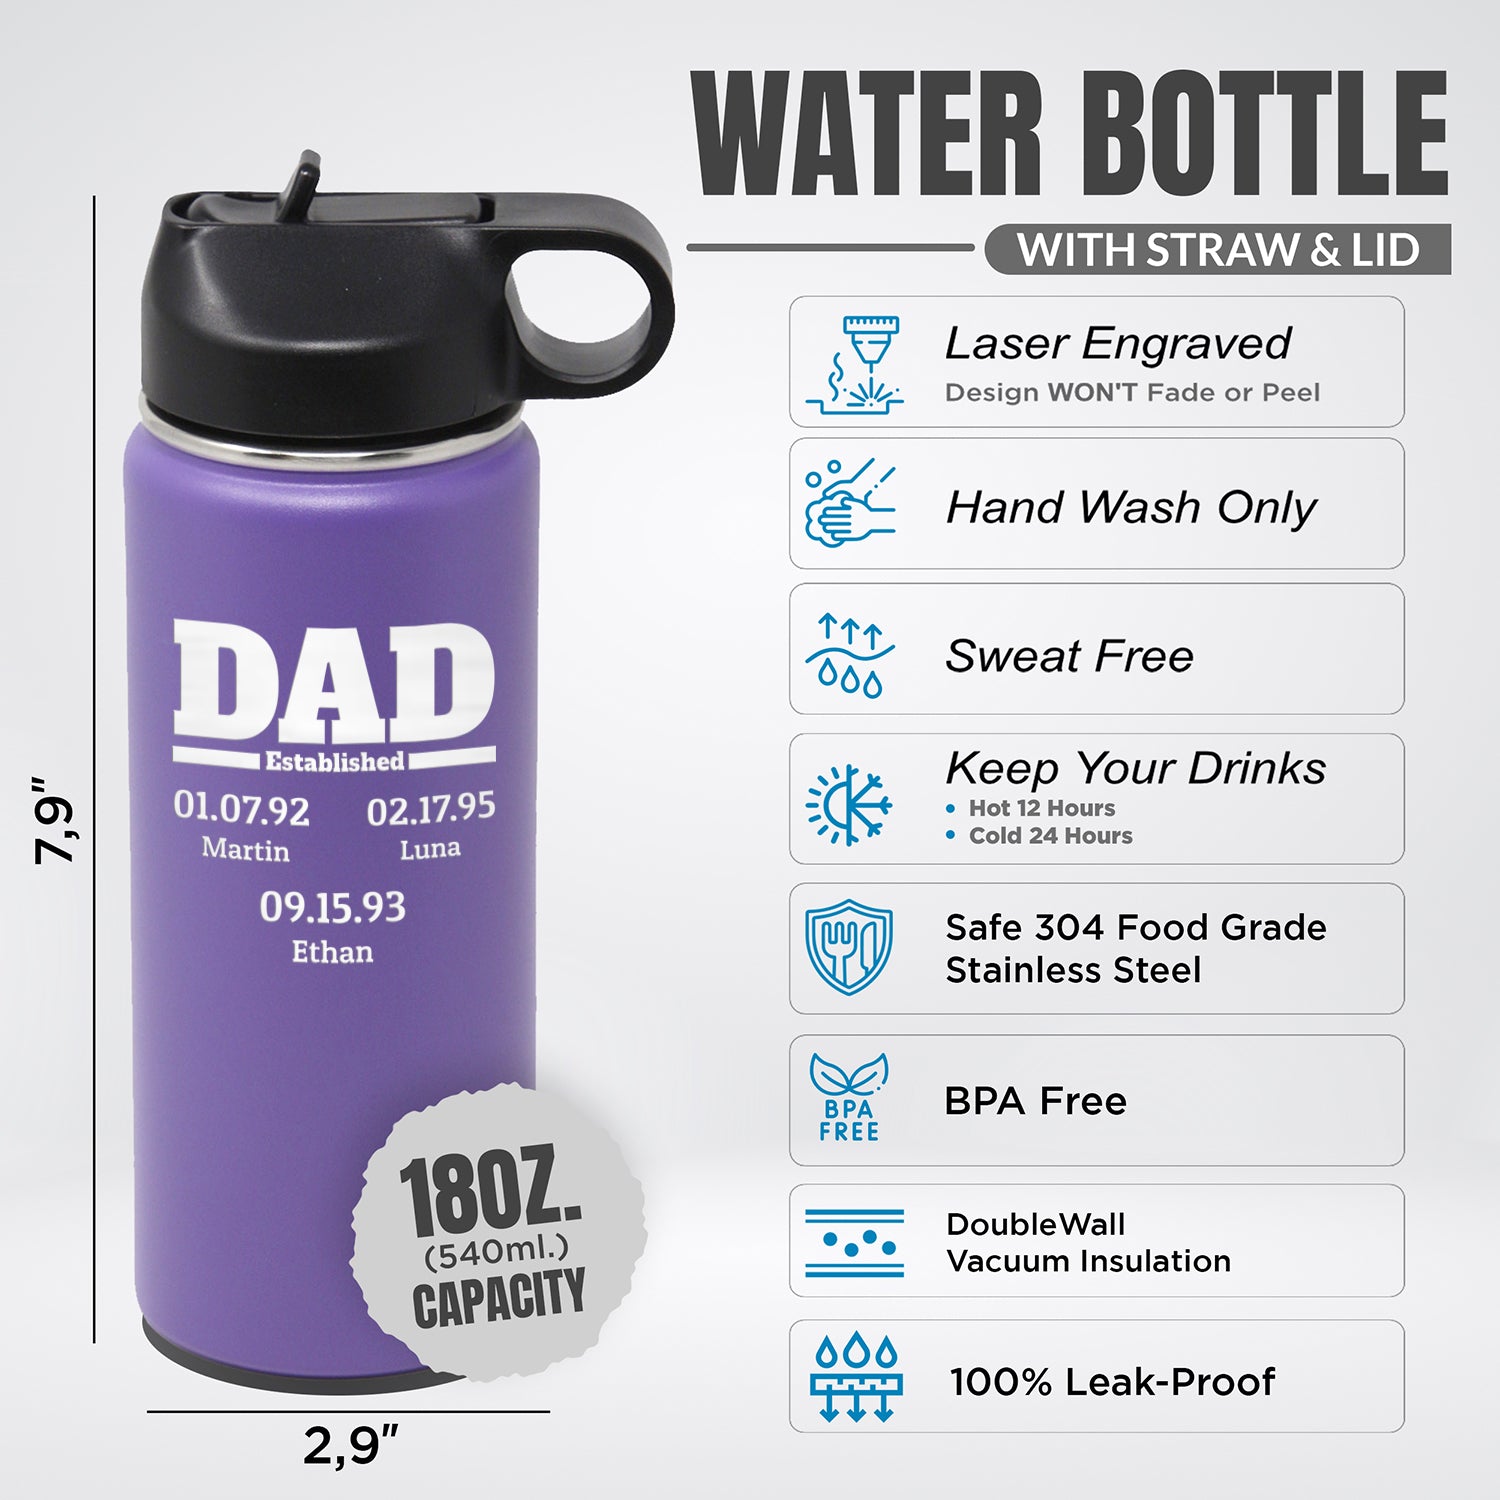 18oz Dad Established Water Bottle with Lid and Straw, Insulated Stainless Steel Sports Water Bottle Double Wall Vacuum Insulated Gift Cup